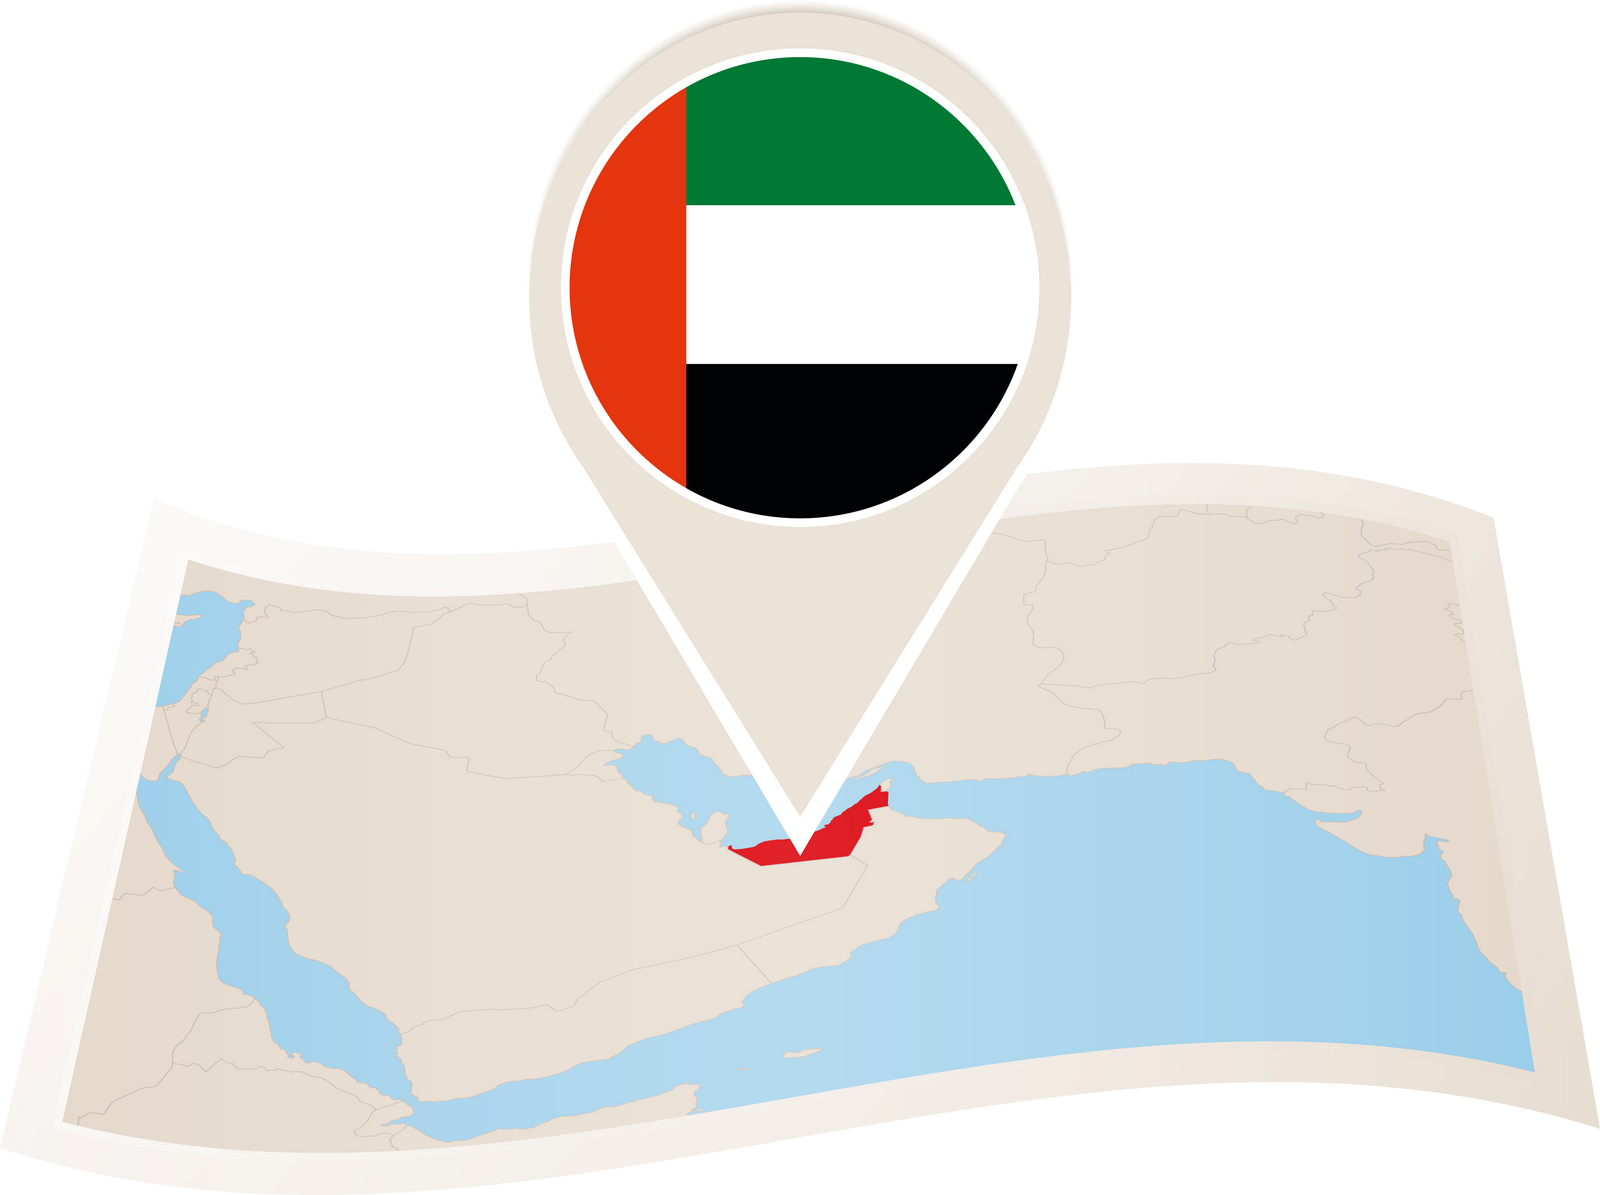 Folded paper map of United Arab Emirates with flag pin of UAE.